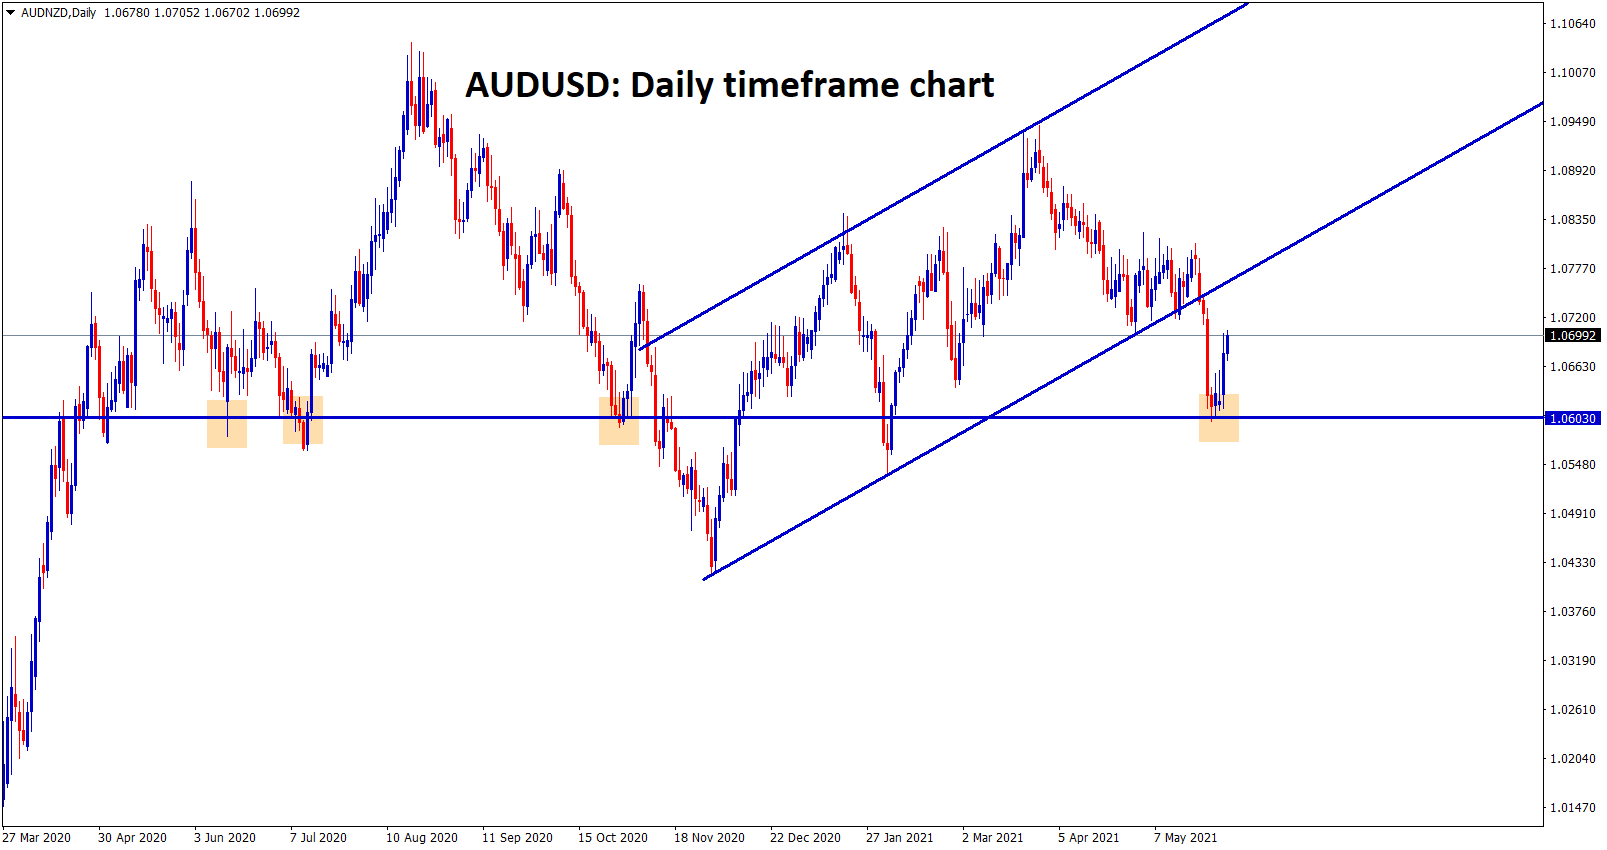 AUDNZD is bouncing back from the important support zone